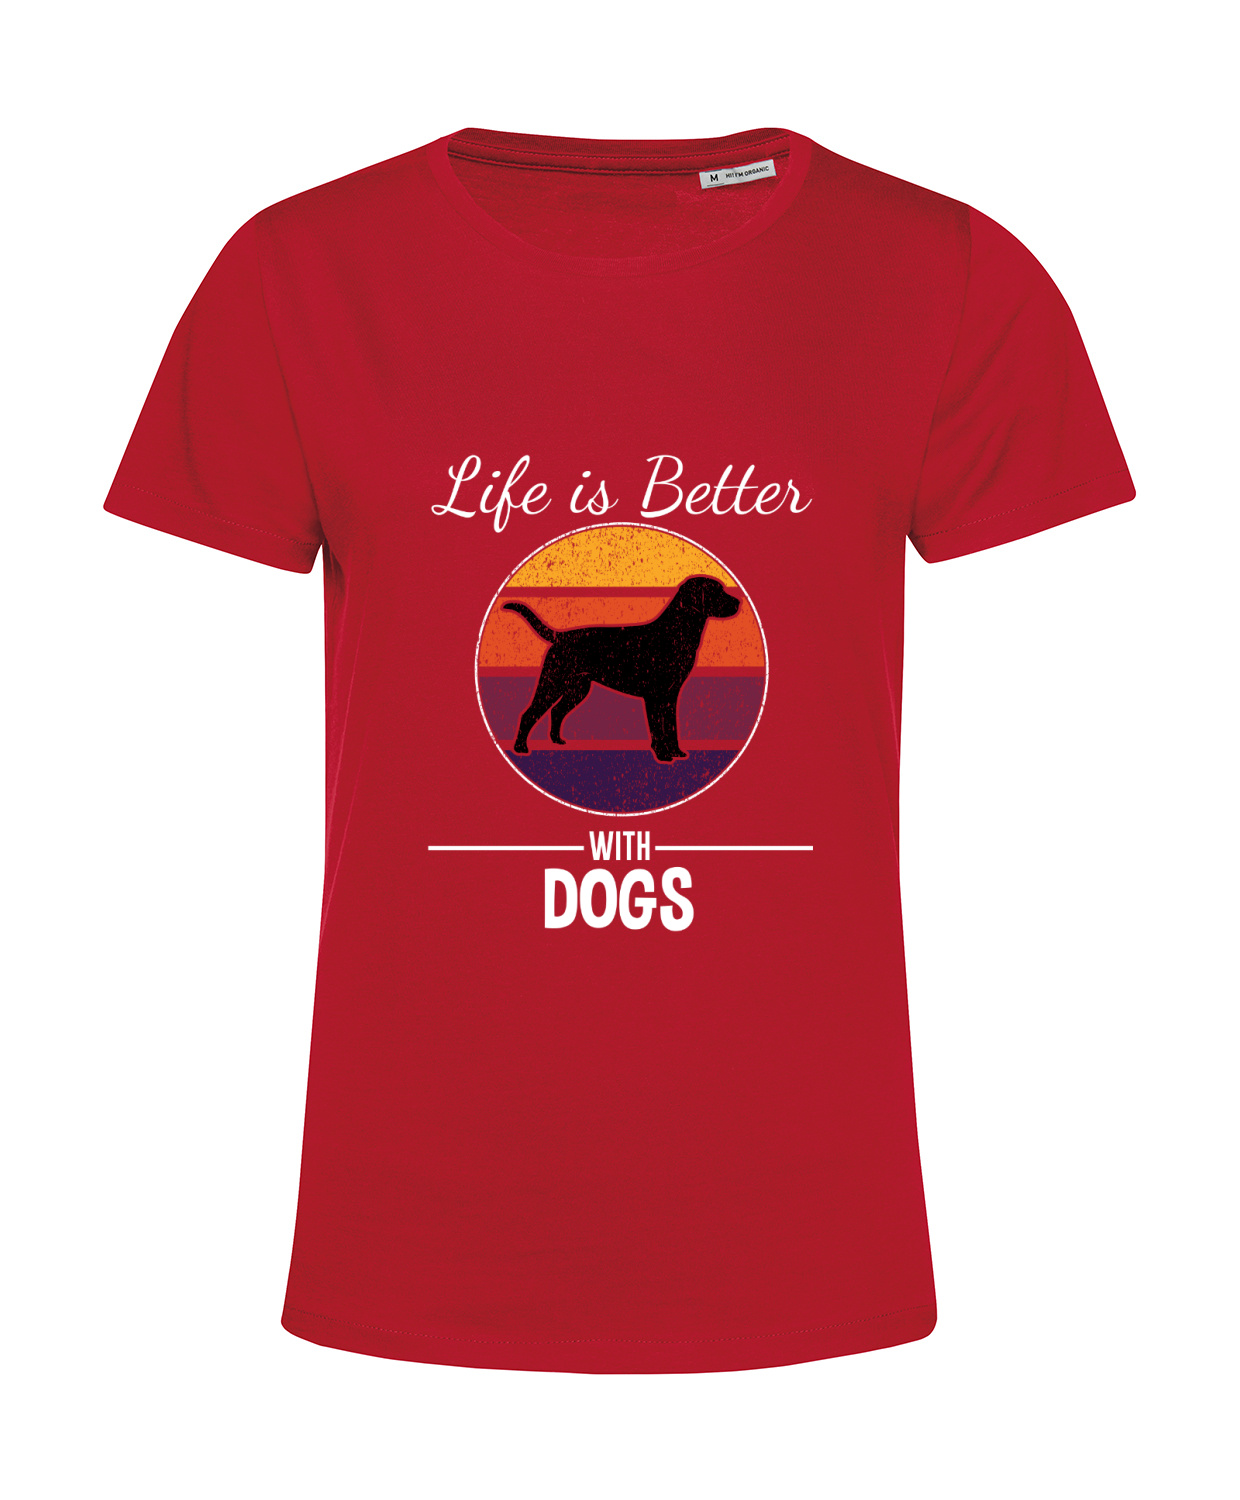 Nachhaltiges T-Shirt Damen Hunde - Life is Better with Dogs